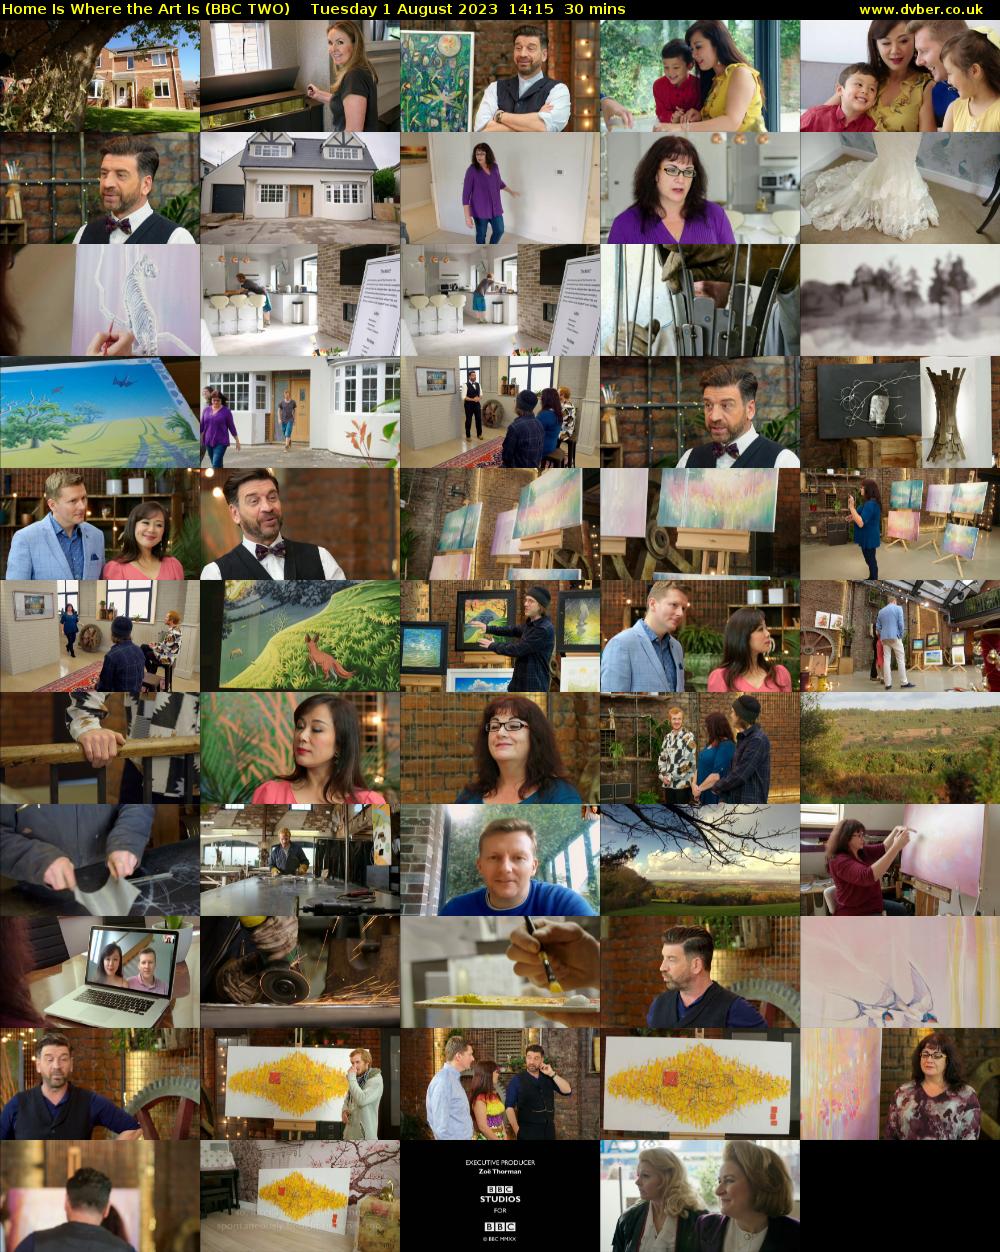 Home Is Where the Art Is (BBC TWO) Tuesday 1 August 2023 14:15 - 14:45